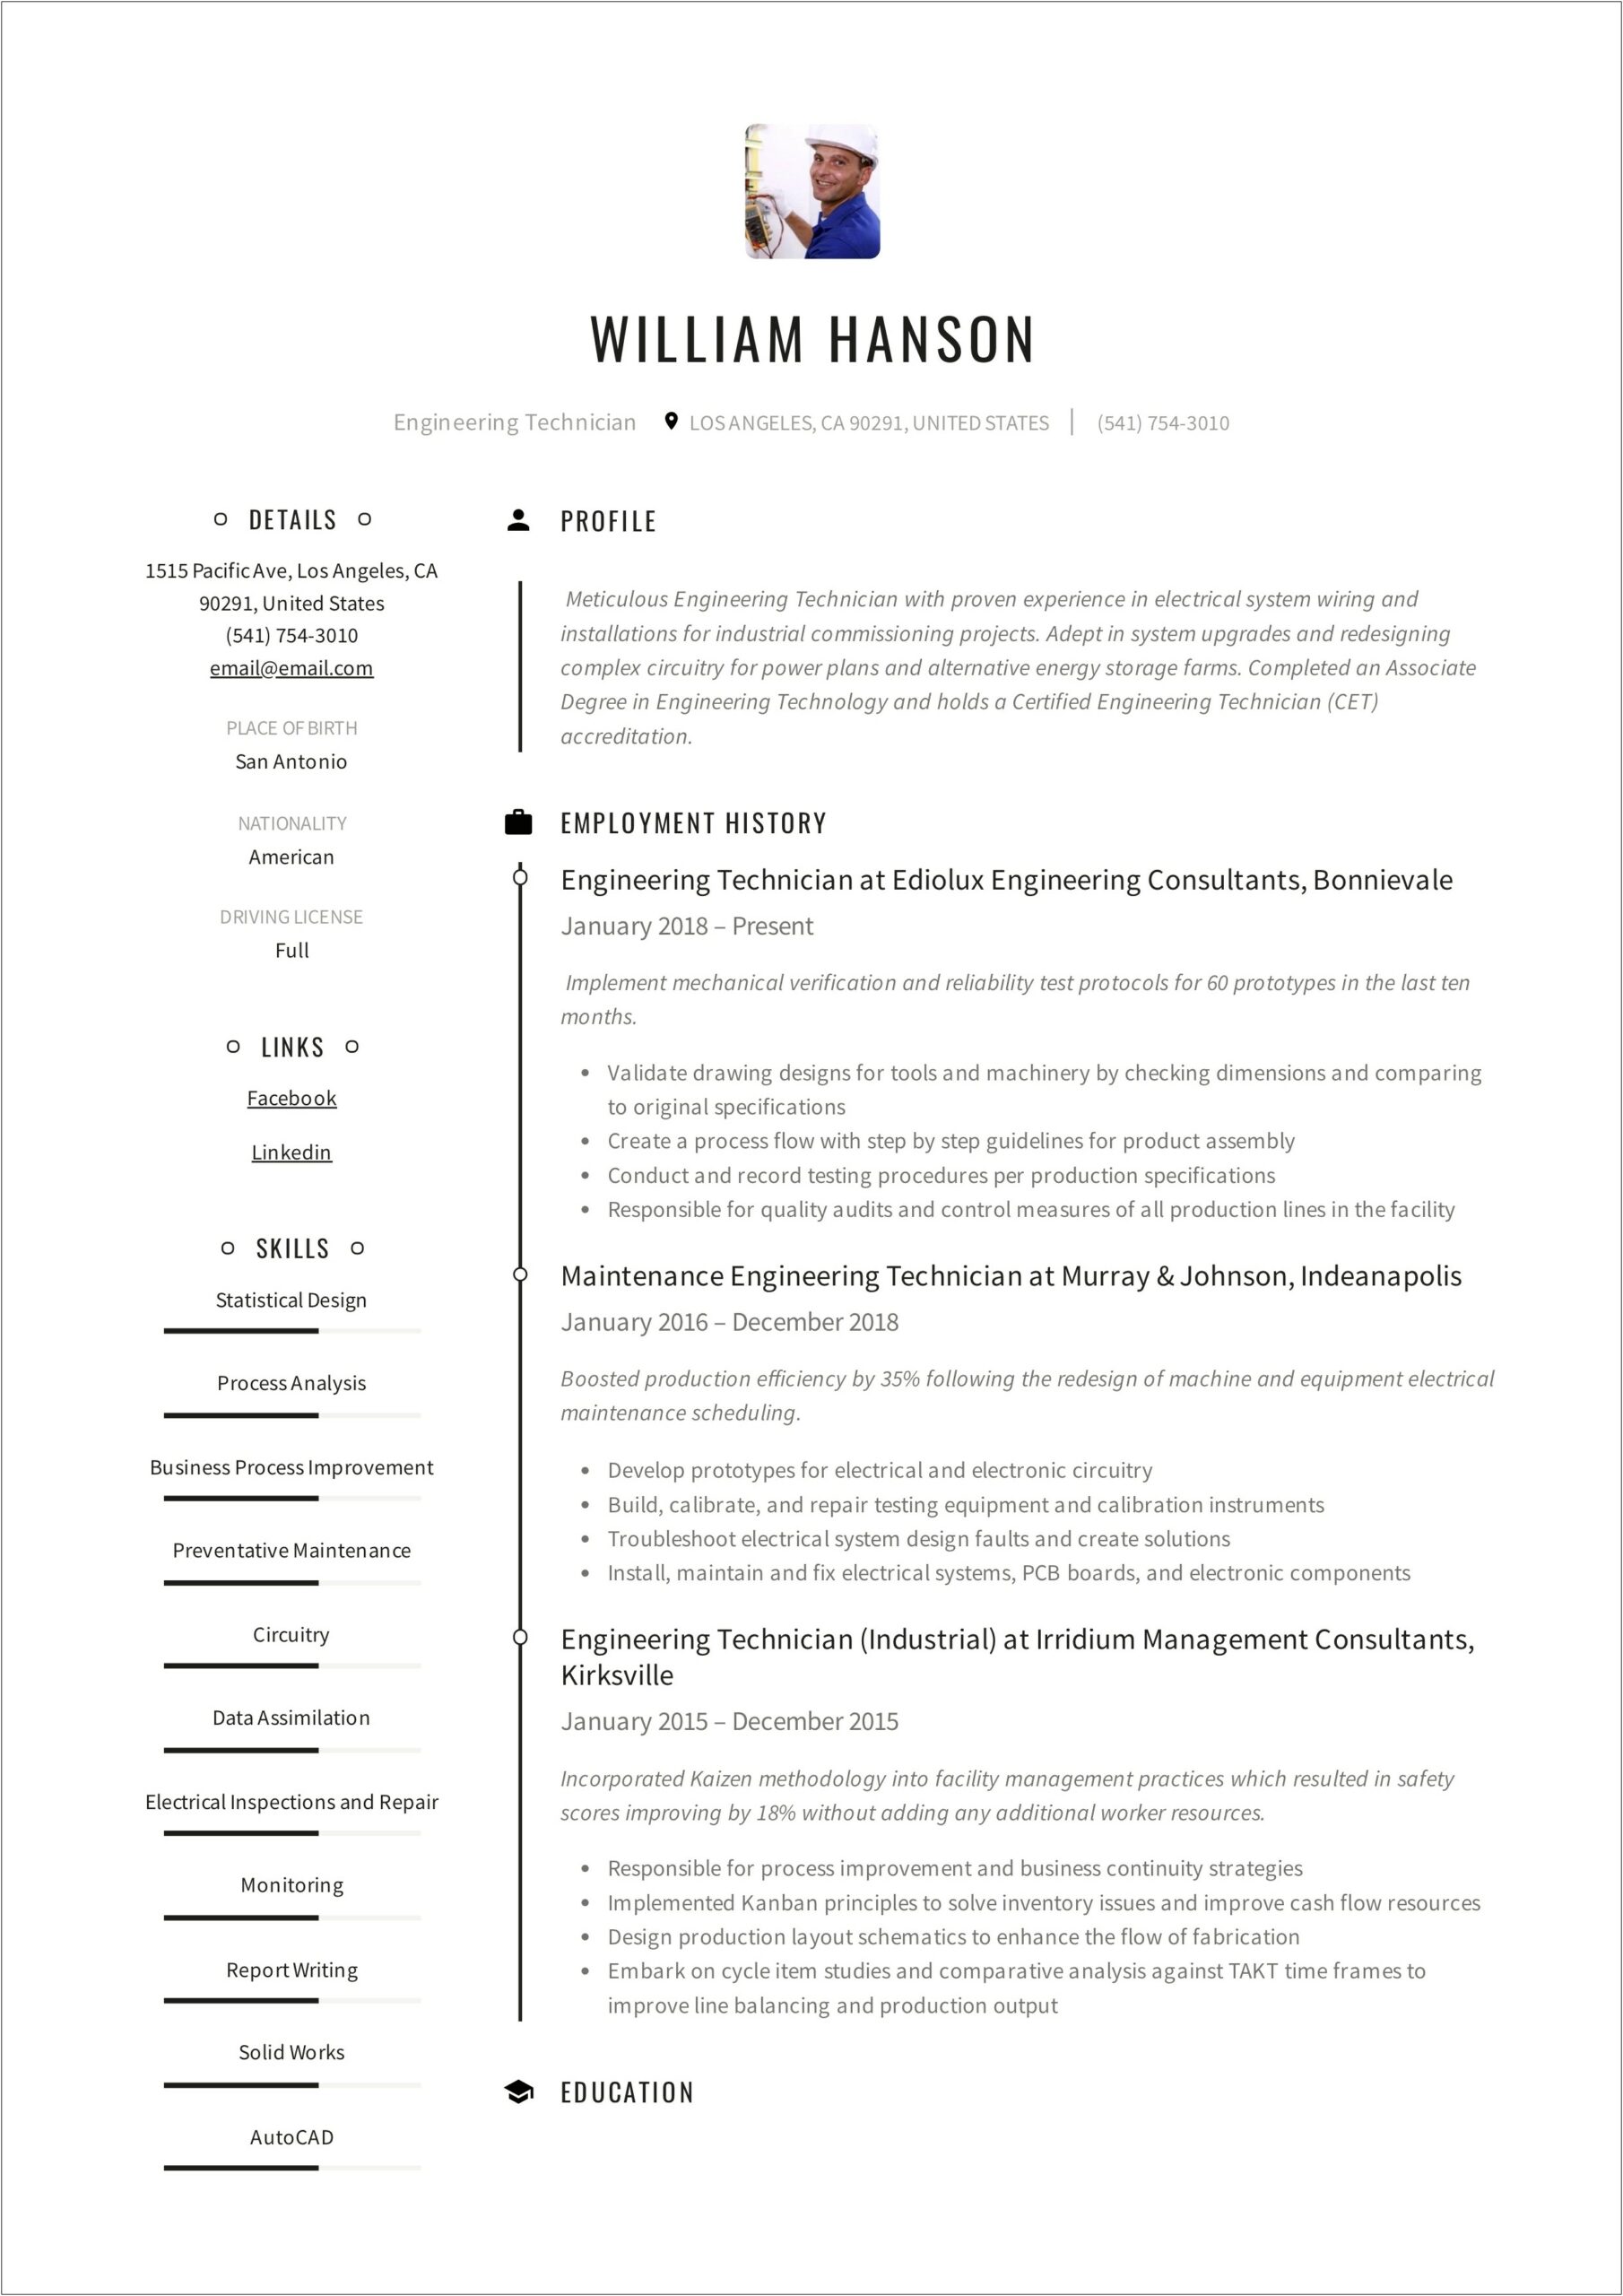 Resume Objectives For Engineering Technician Position